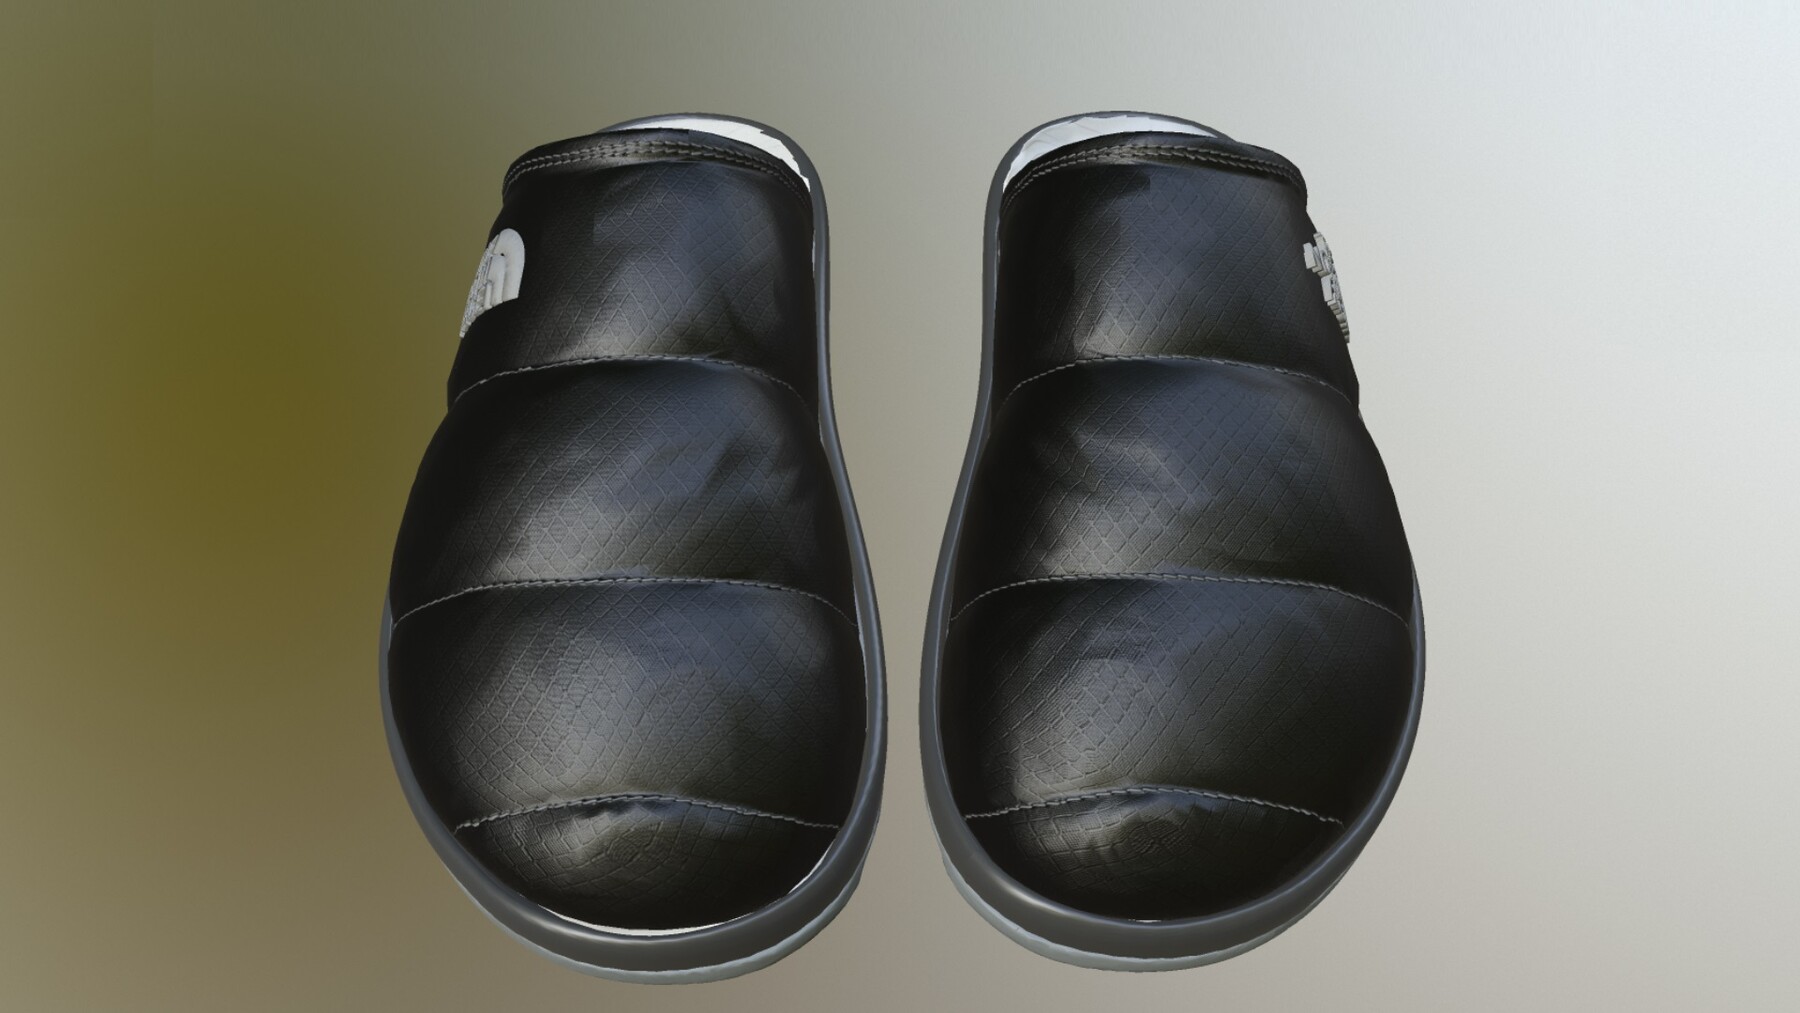 ArtStation - THE NORTH FACE SLIPPERS low-poly PBR | Game Assets